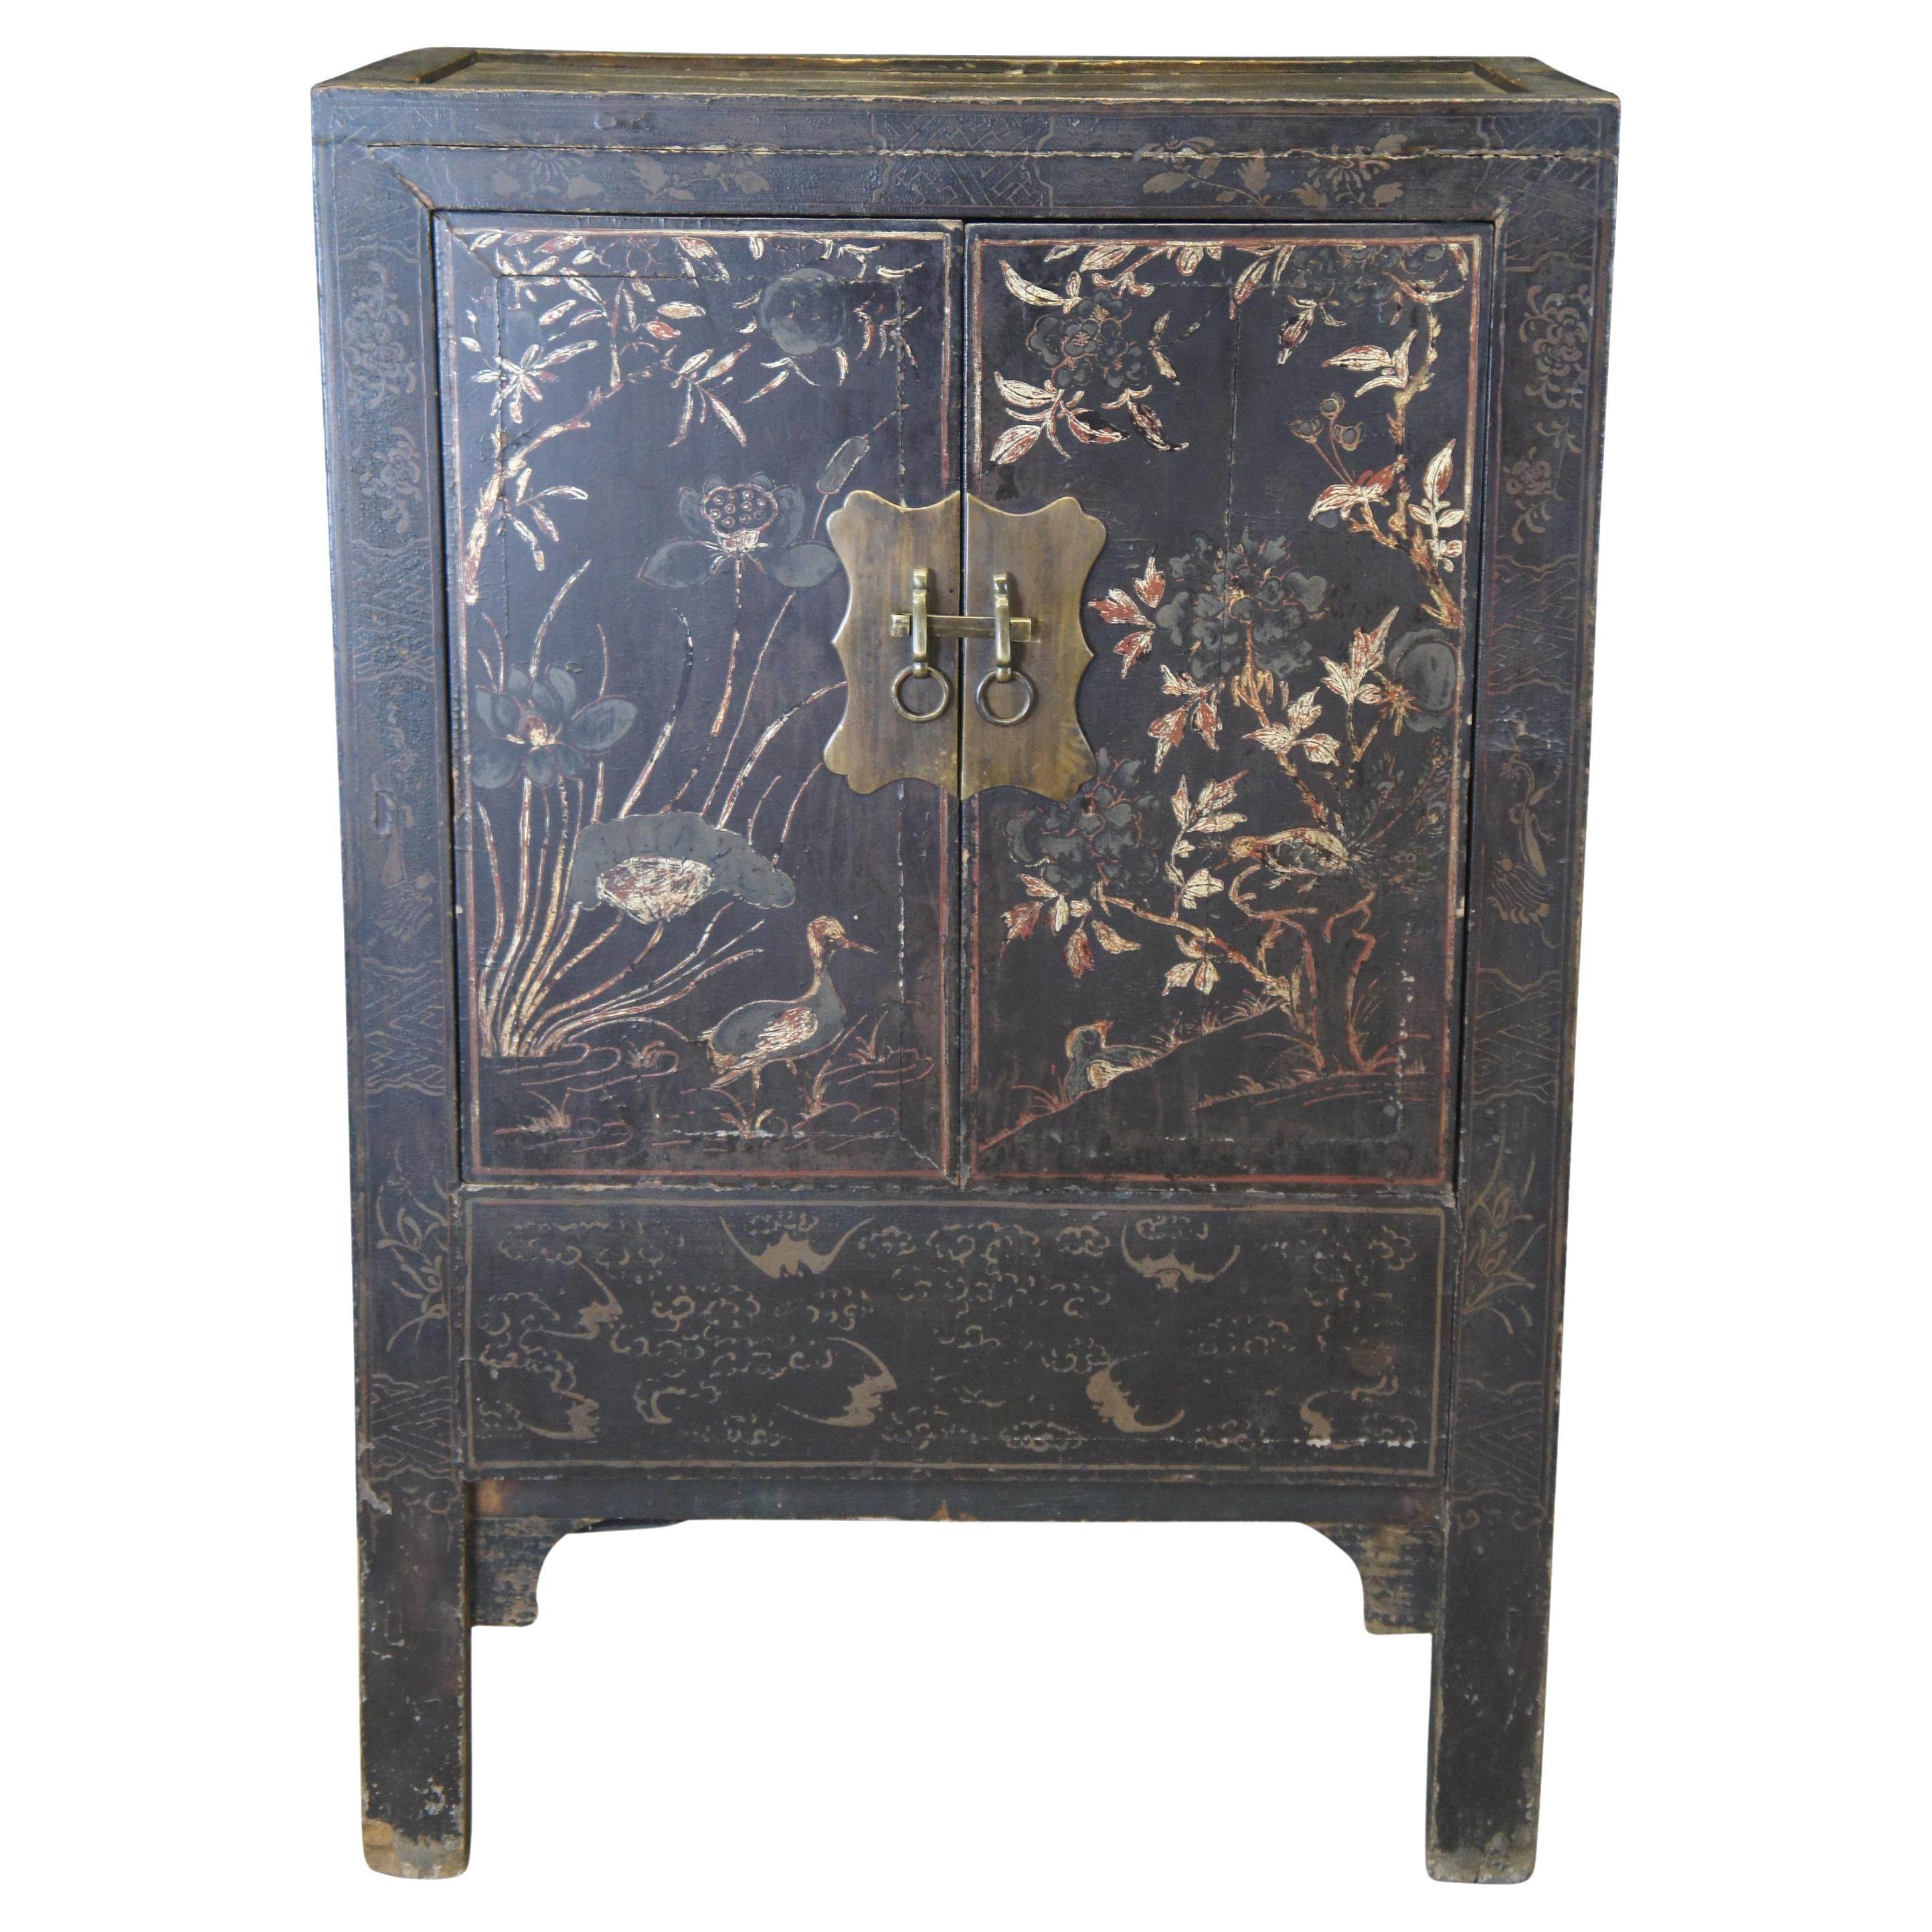 Vintage Chinese Black Lacquer Hand Painted Armoire Wardrobe Cabinet Duck Scene